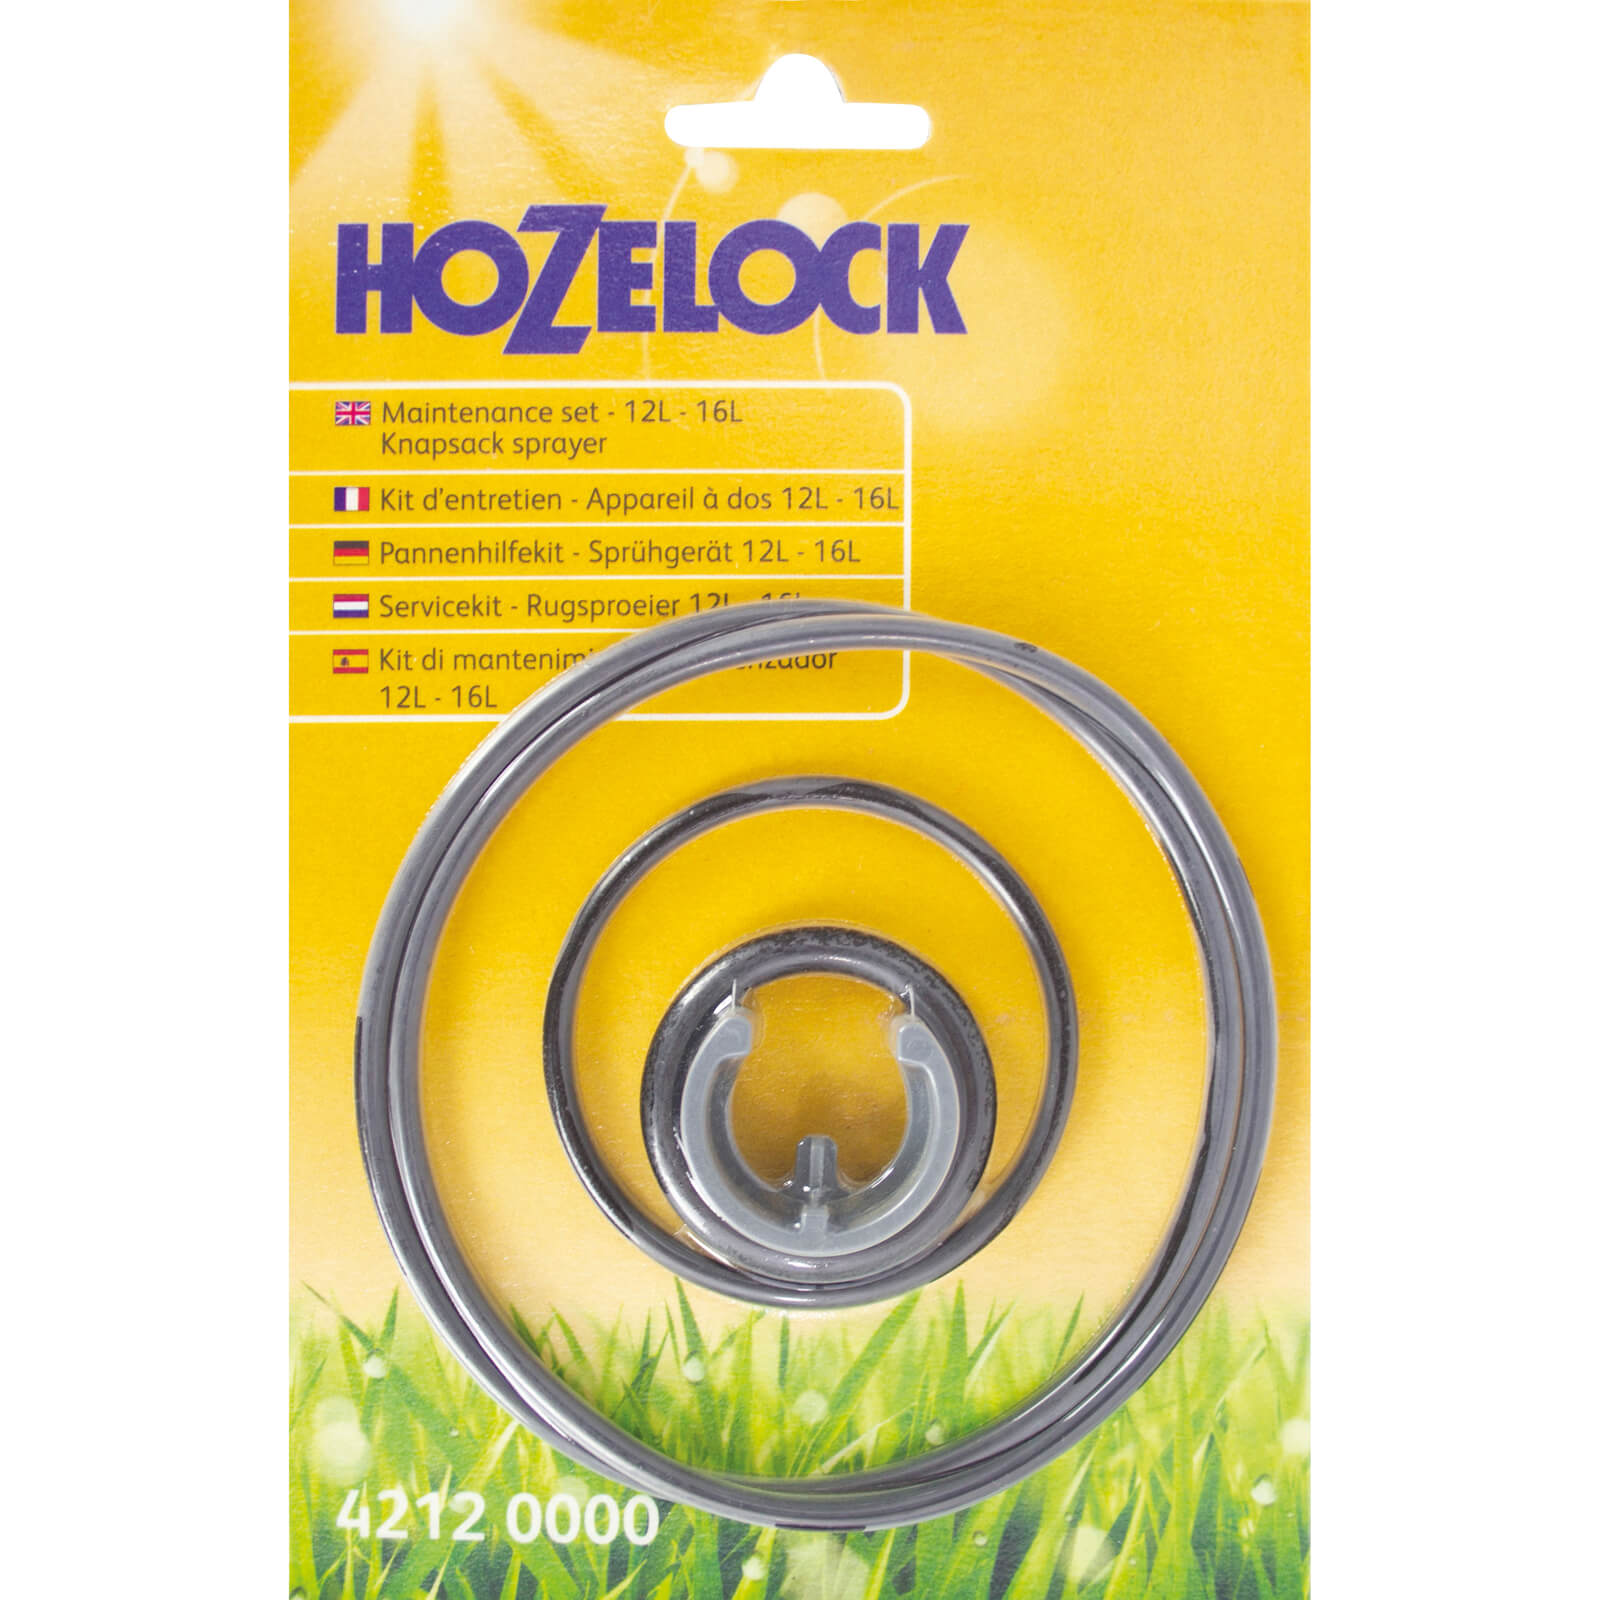 Image of Hozelock Comfort Service Kit for Pulsar 12L and 16L Pressure Sprayers